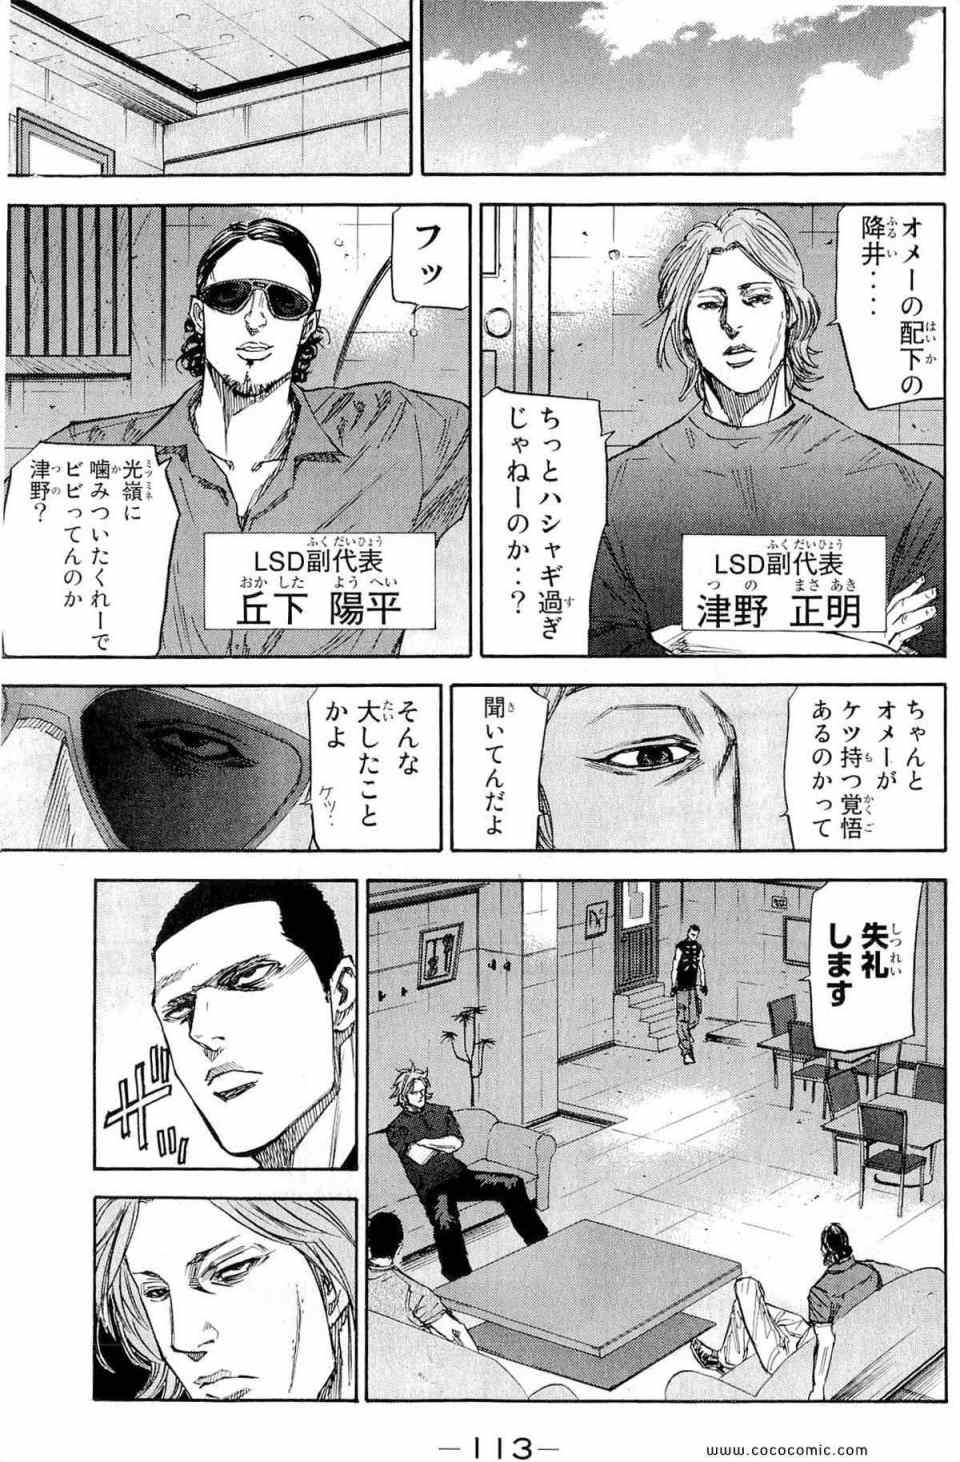 《A-BOUT!(日文)》漫画 A-BOUT! 05卷